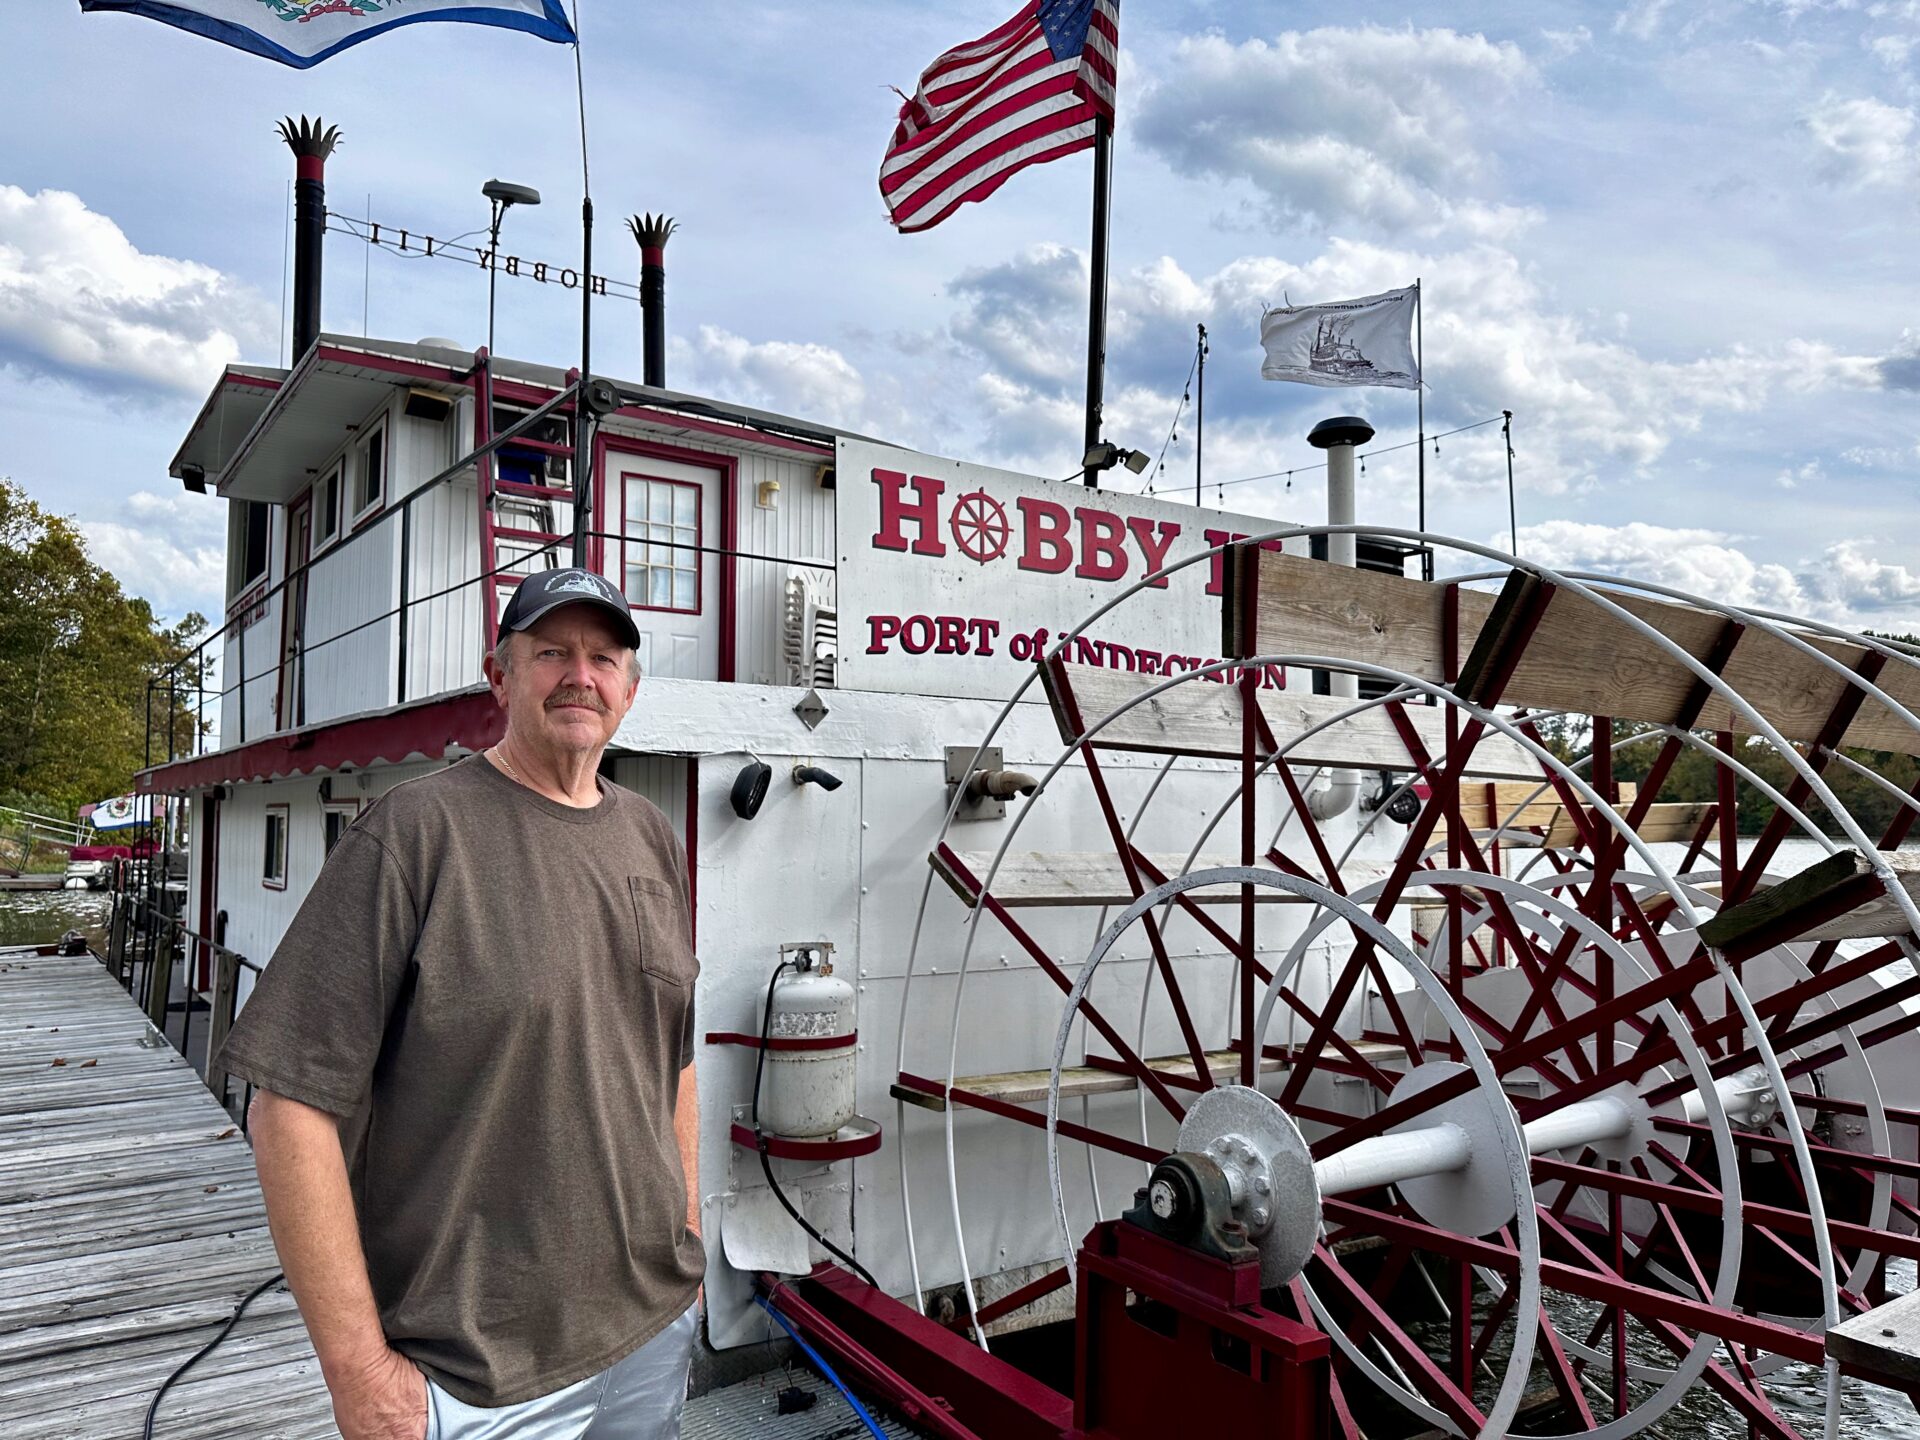 A man in a gray shirt stands in front of a sternwheeler.